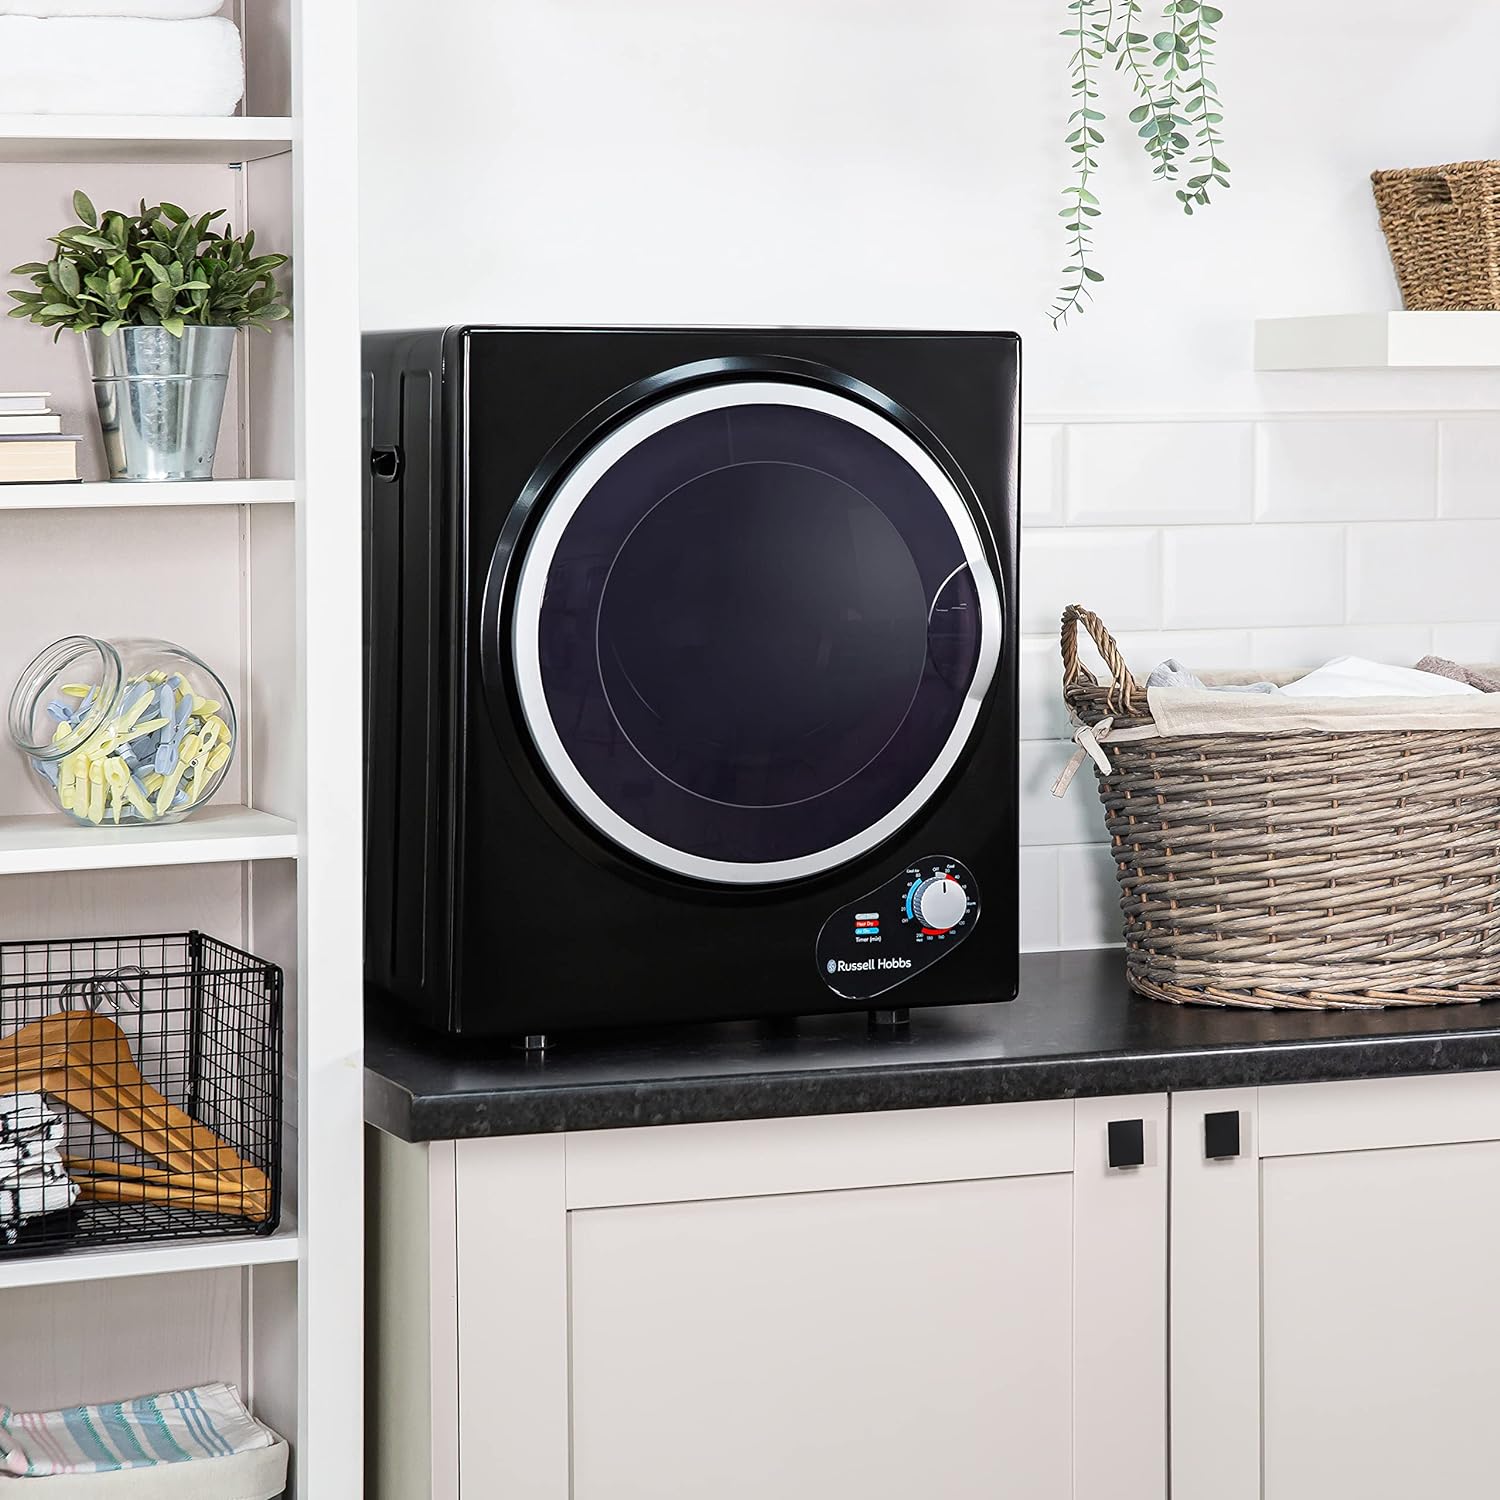 Russell Hobbs RH3VTD800B Black 2.5kg Compact Mini Vented Tumble Dryer, Portable, Freestanding Table top Dryer with 3 Heat Settings small - Amazing Gadgets Outlet